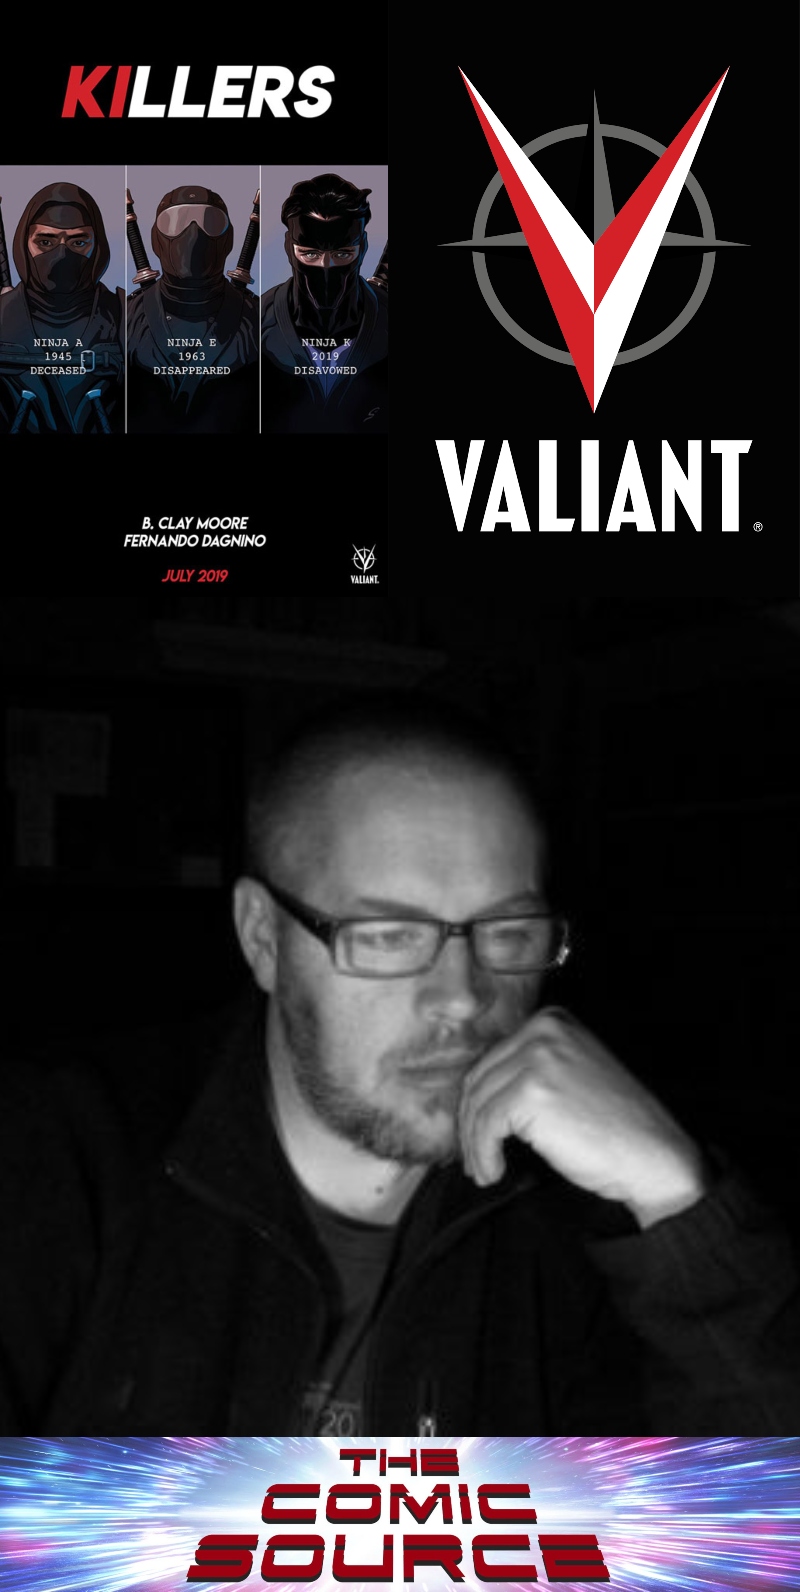 Killers with B. Clay Moore – Valiant Sunday: The Comic Source Podcast Episode 919